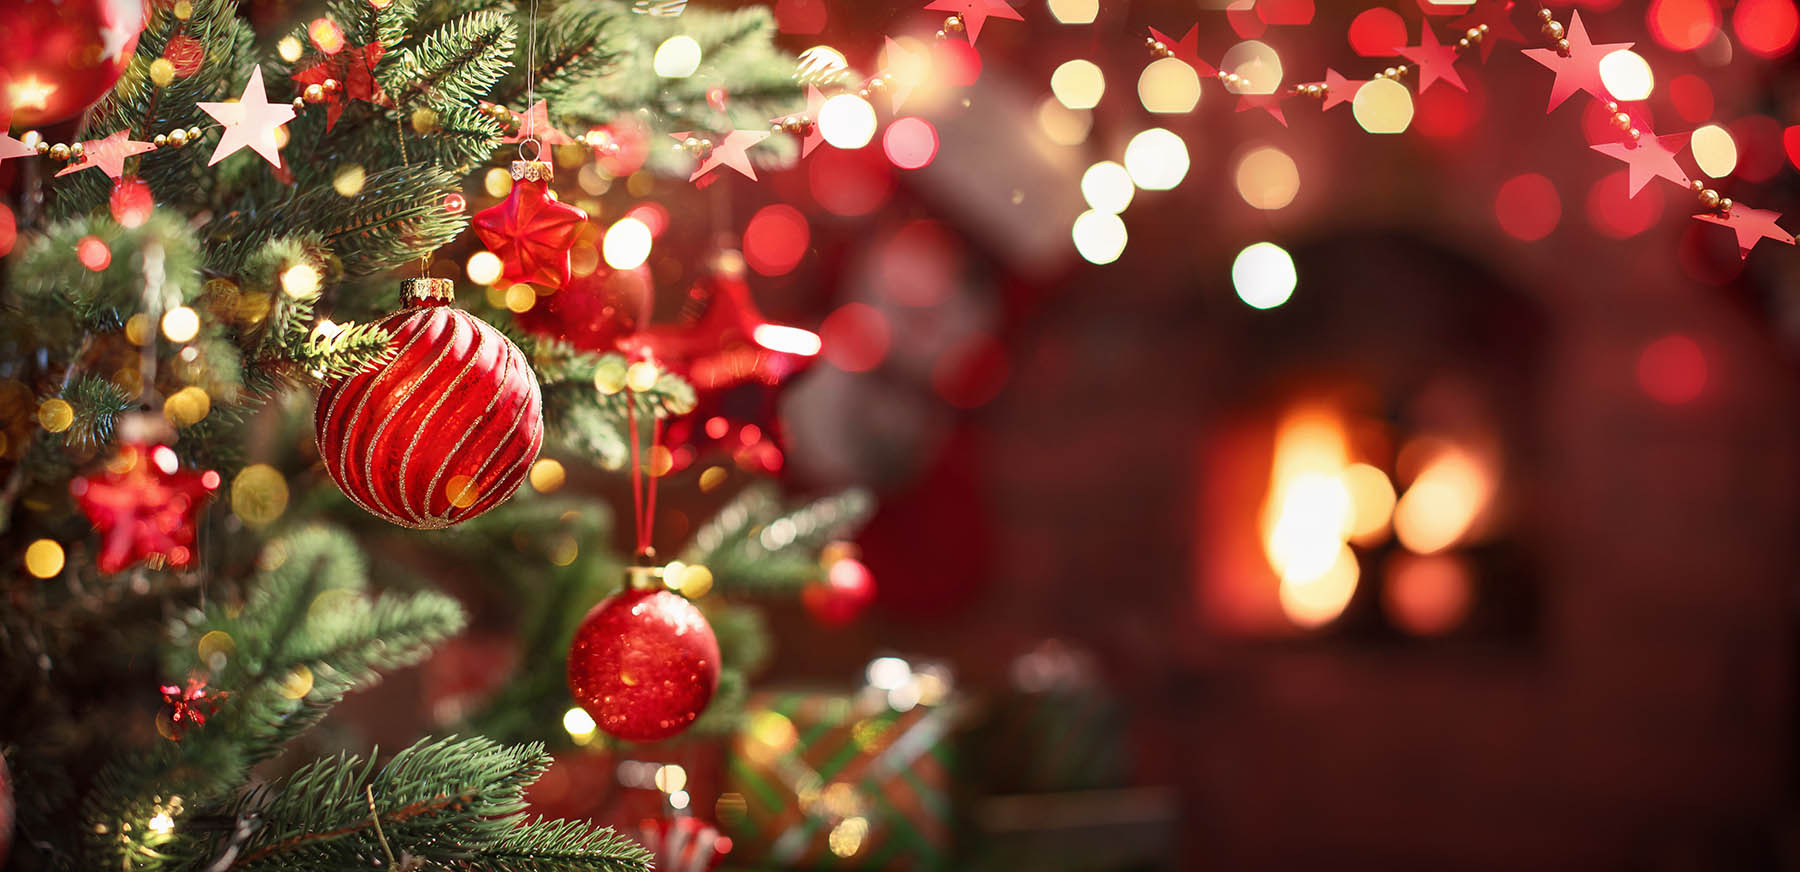 Decorating Mastery: Selecting the Best Christmas Tree Decorations